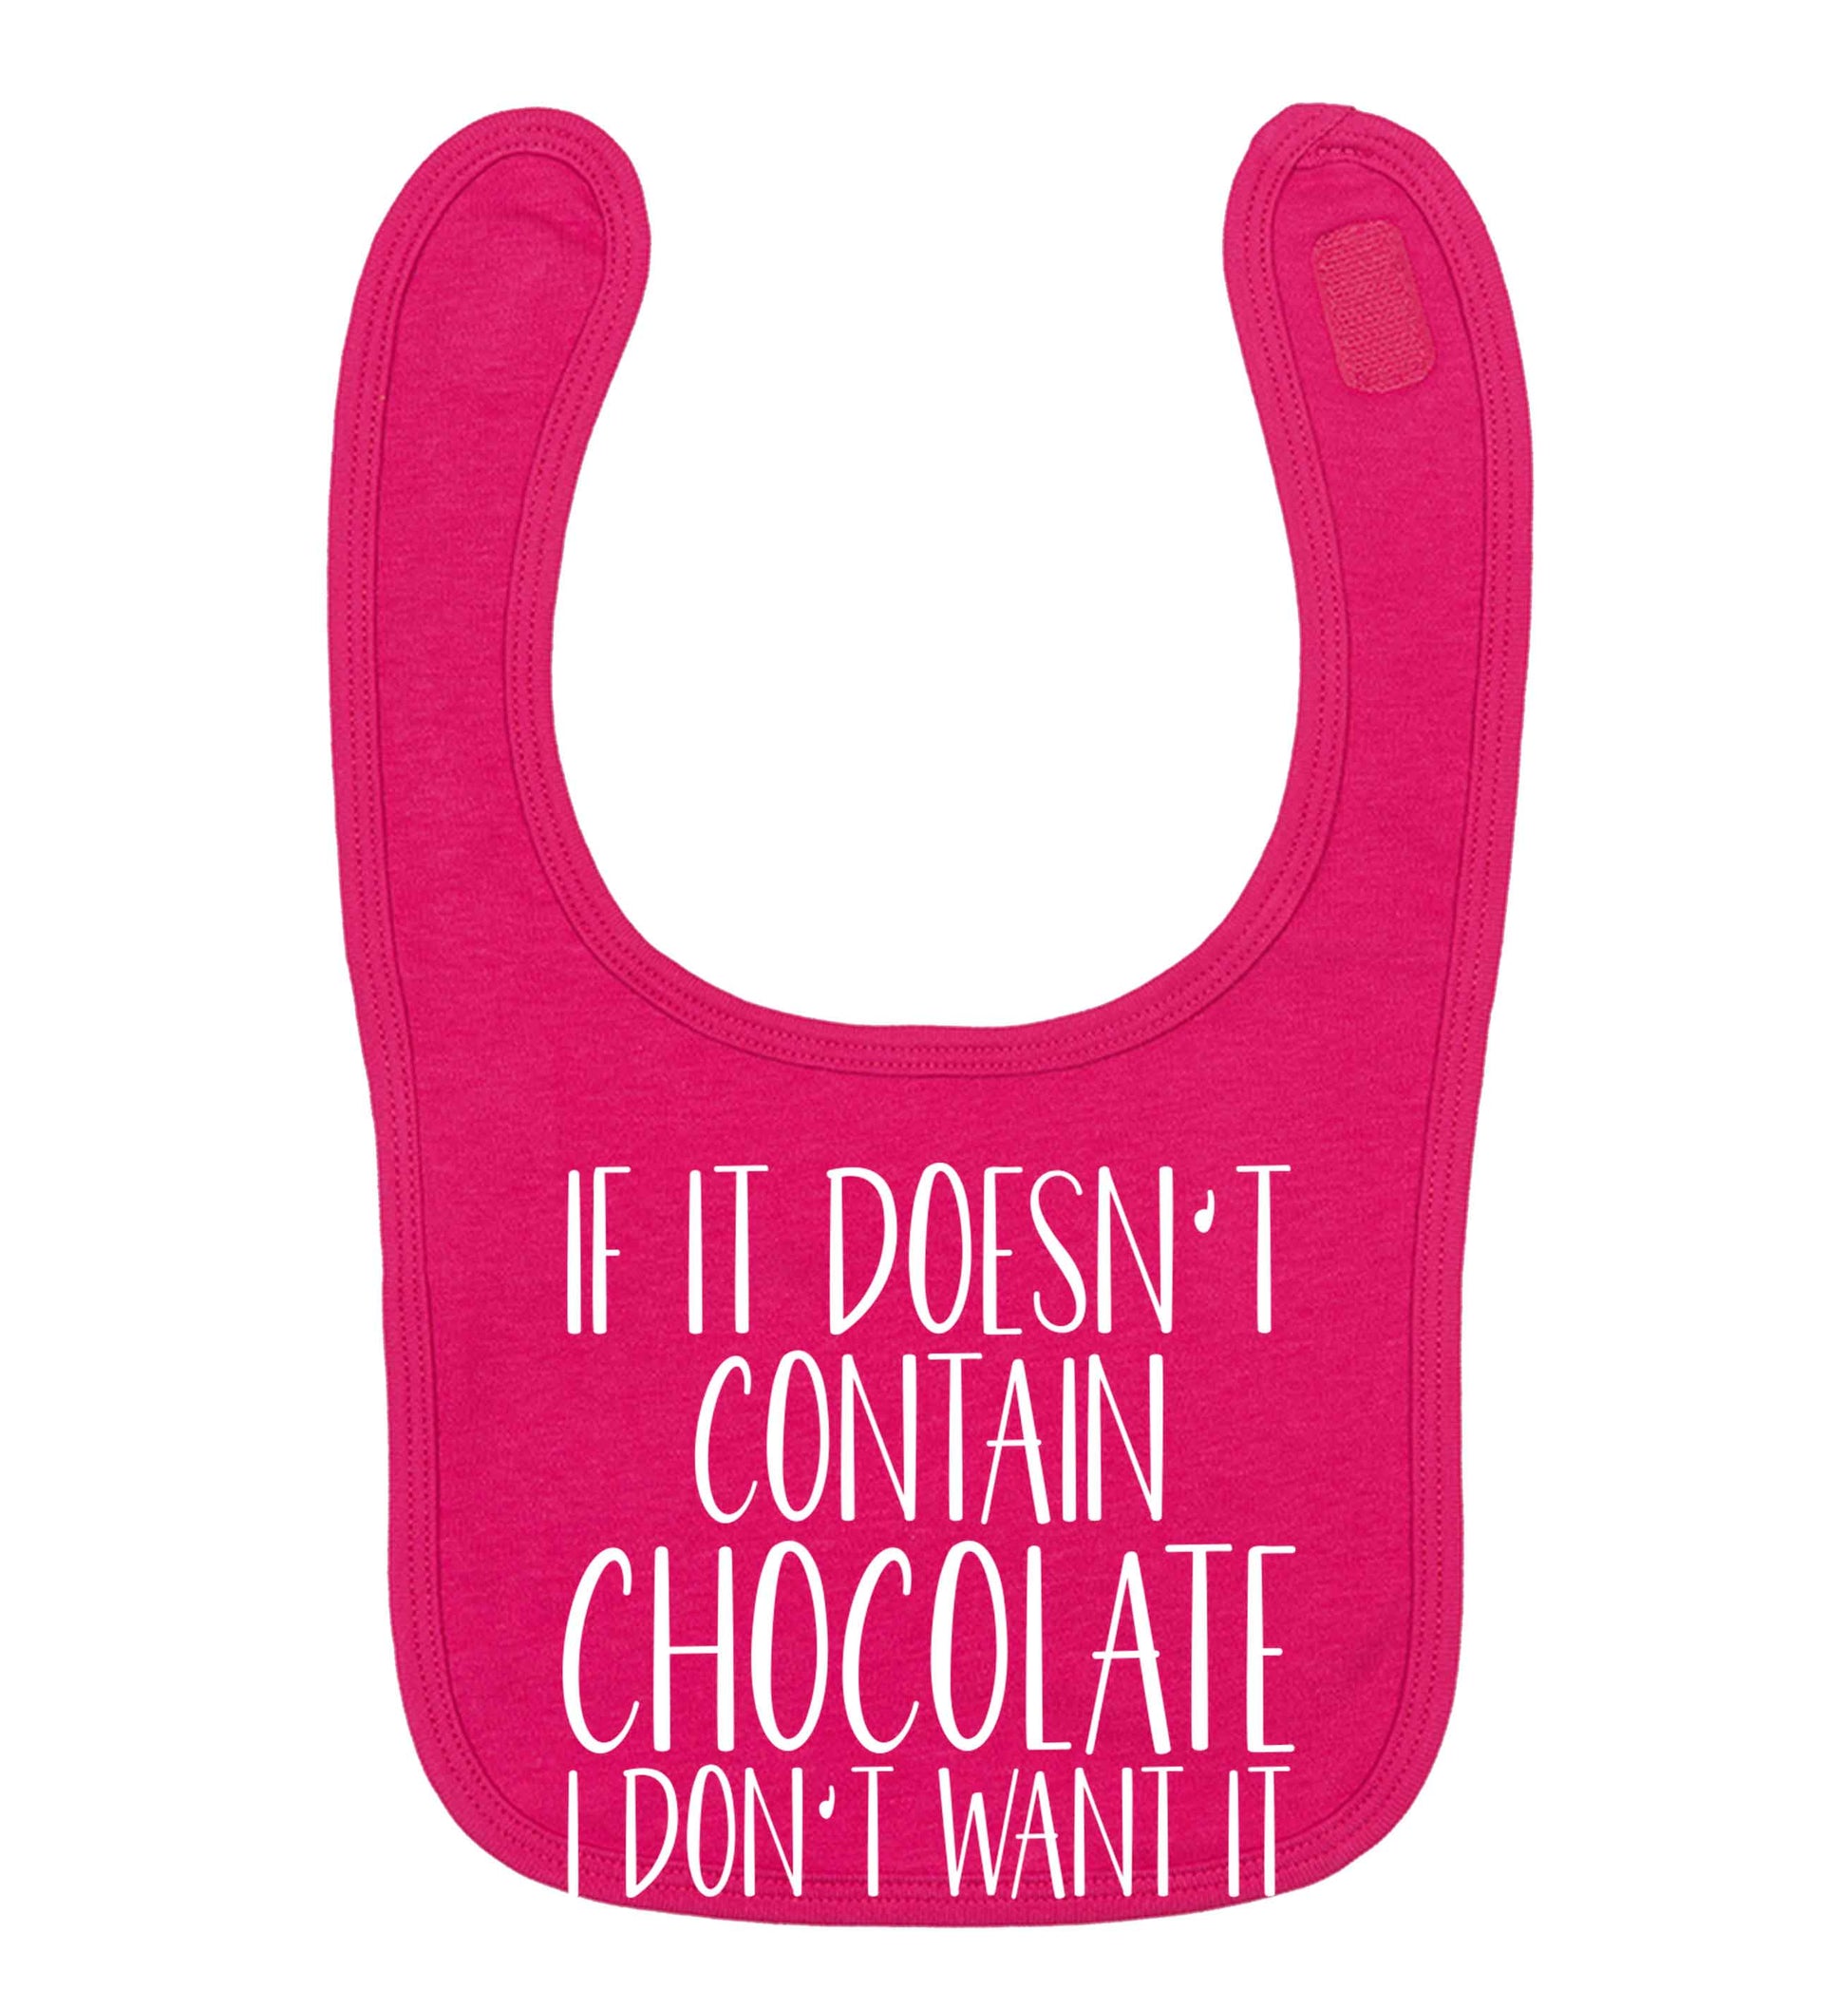 If it doesn't contain chocolate I don't want it dark pink baby bib